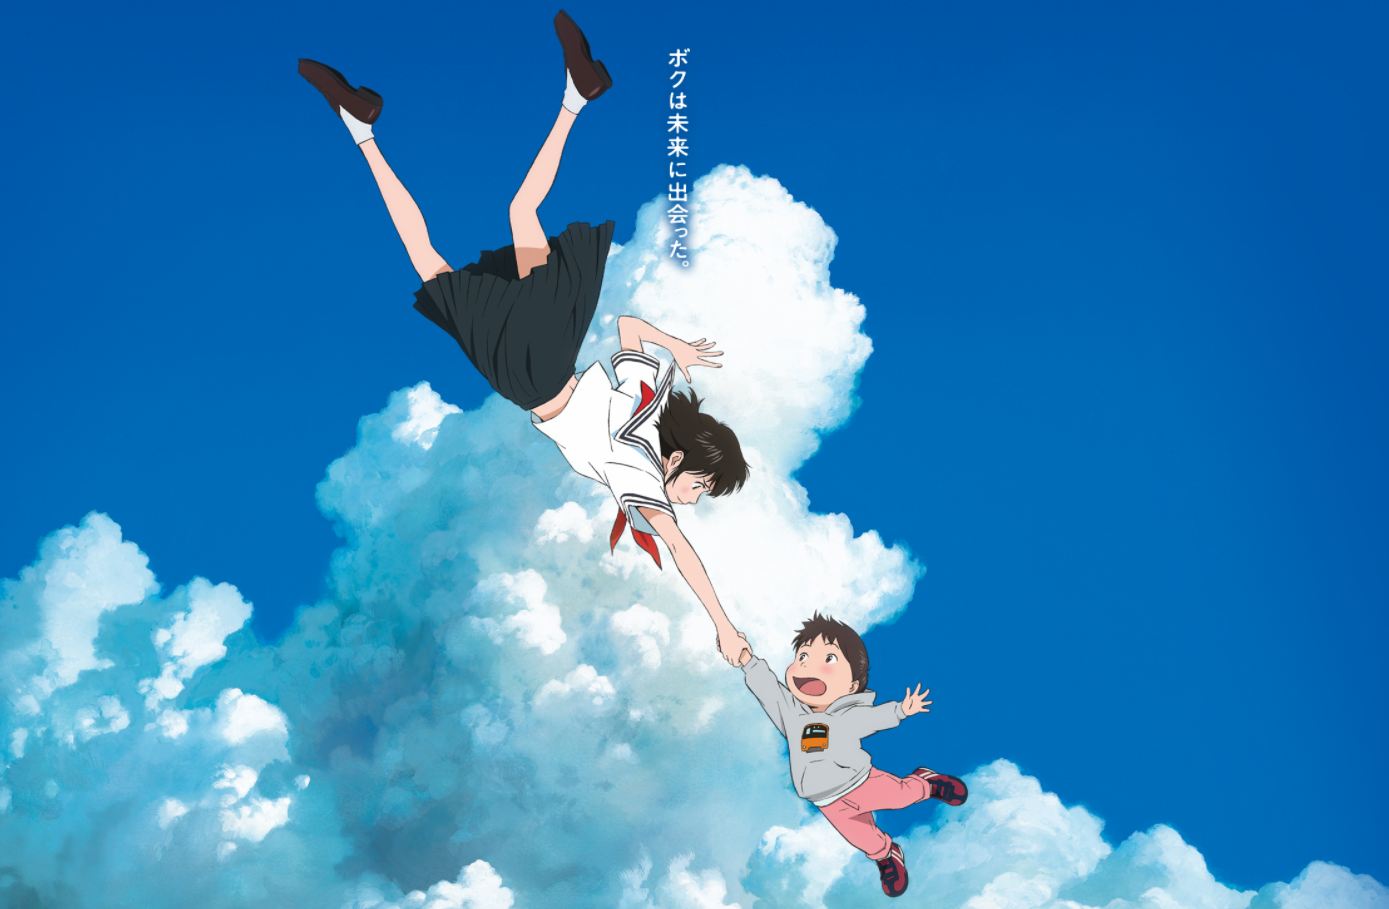 Trailer released for new anime movie from director of Summer Wars